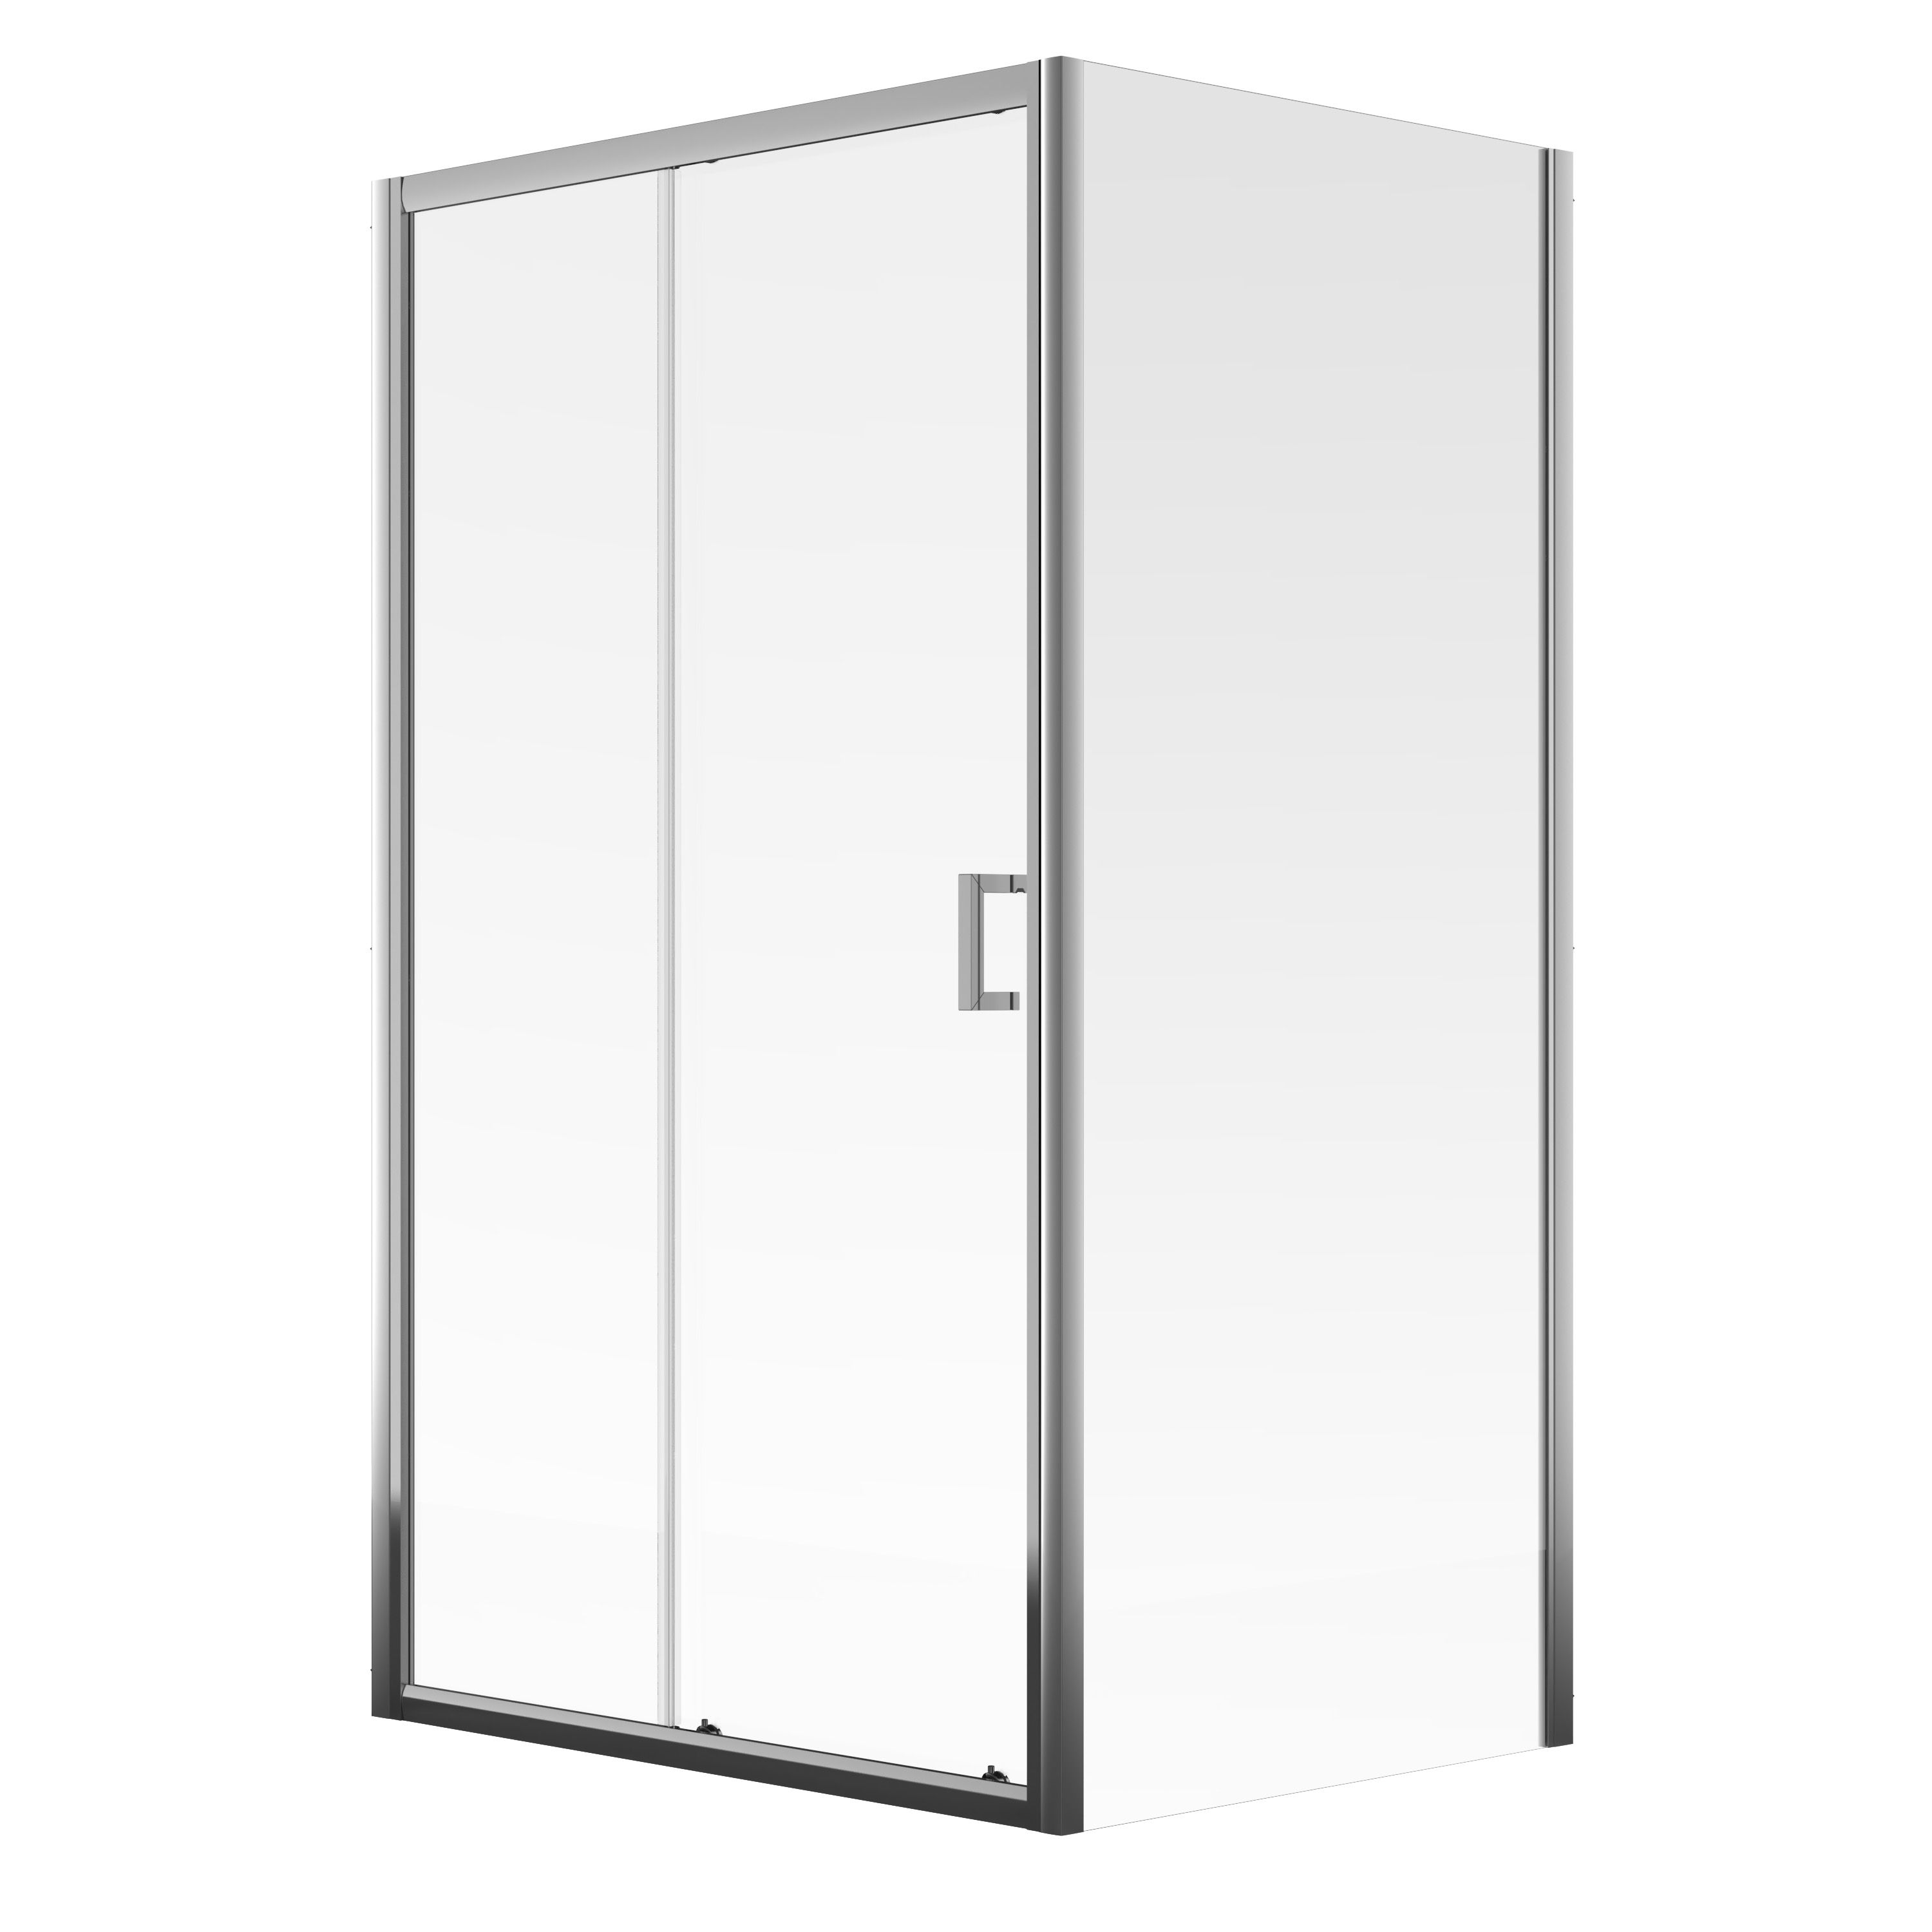 Aqualux Edge 6 Clear Silver effect Left or right Rectangular Shower enclosure with Sliding door (W)120cm (D)90cm